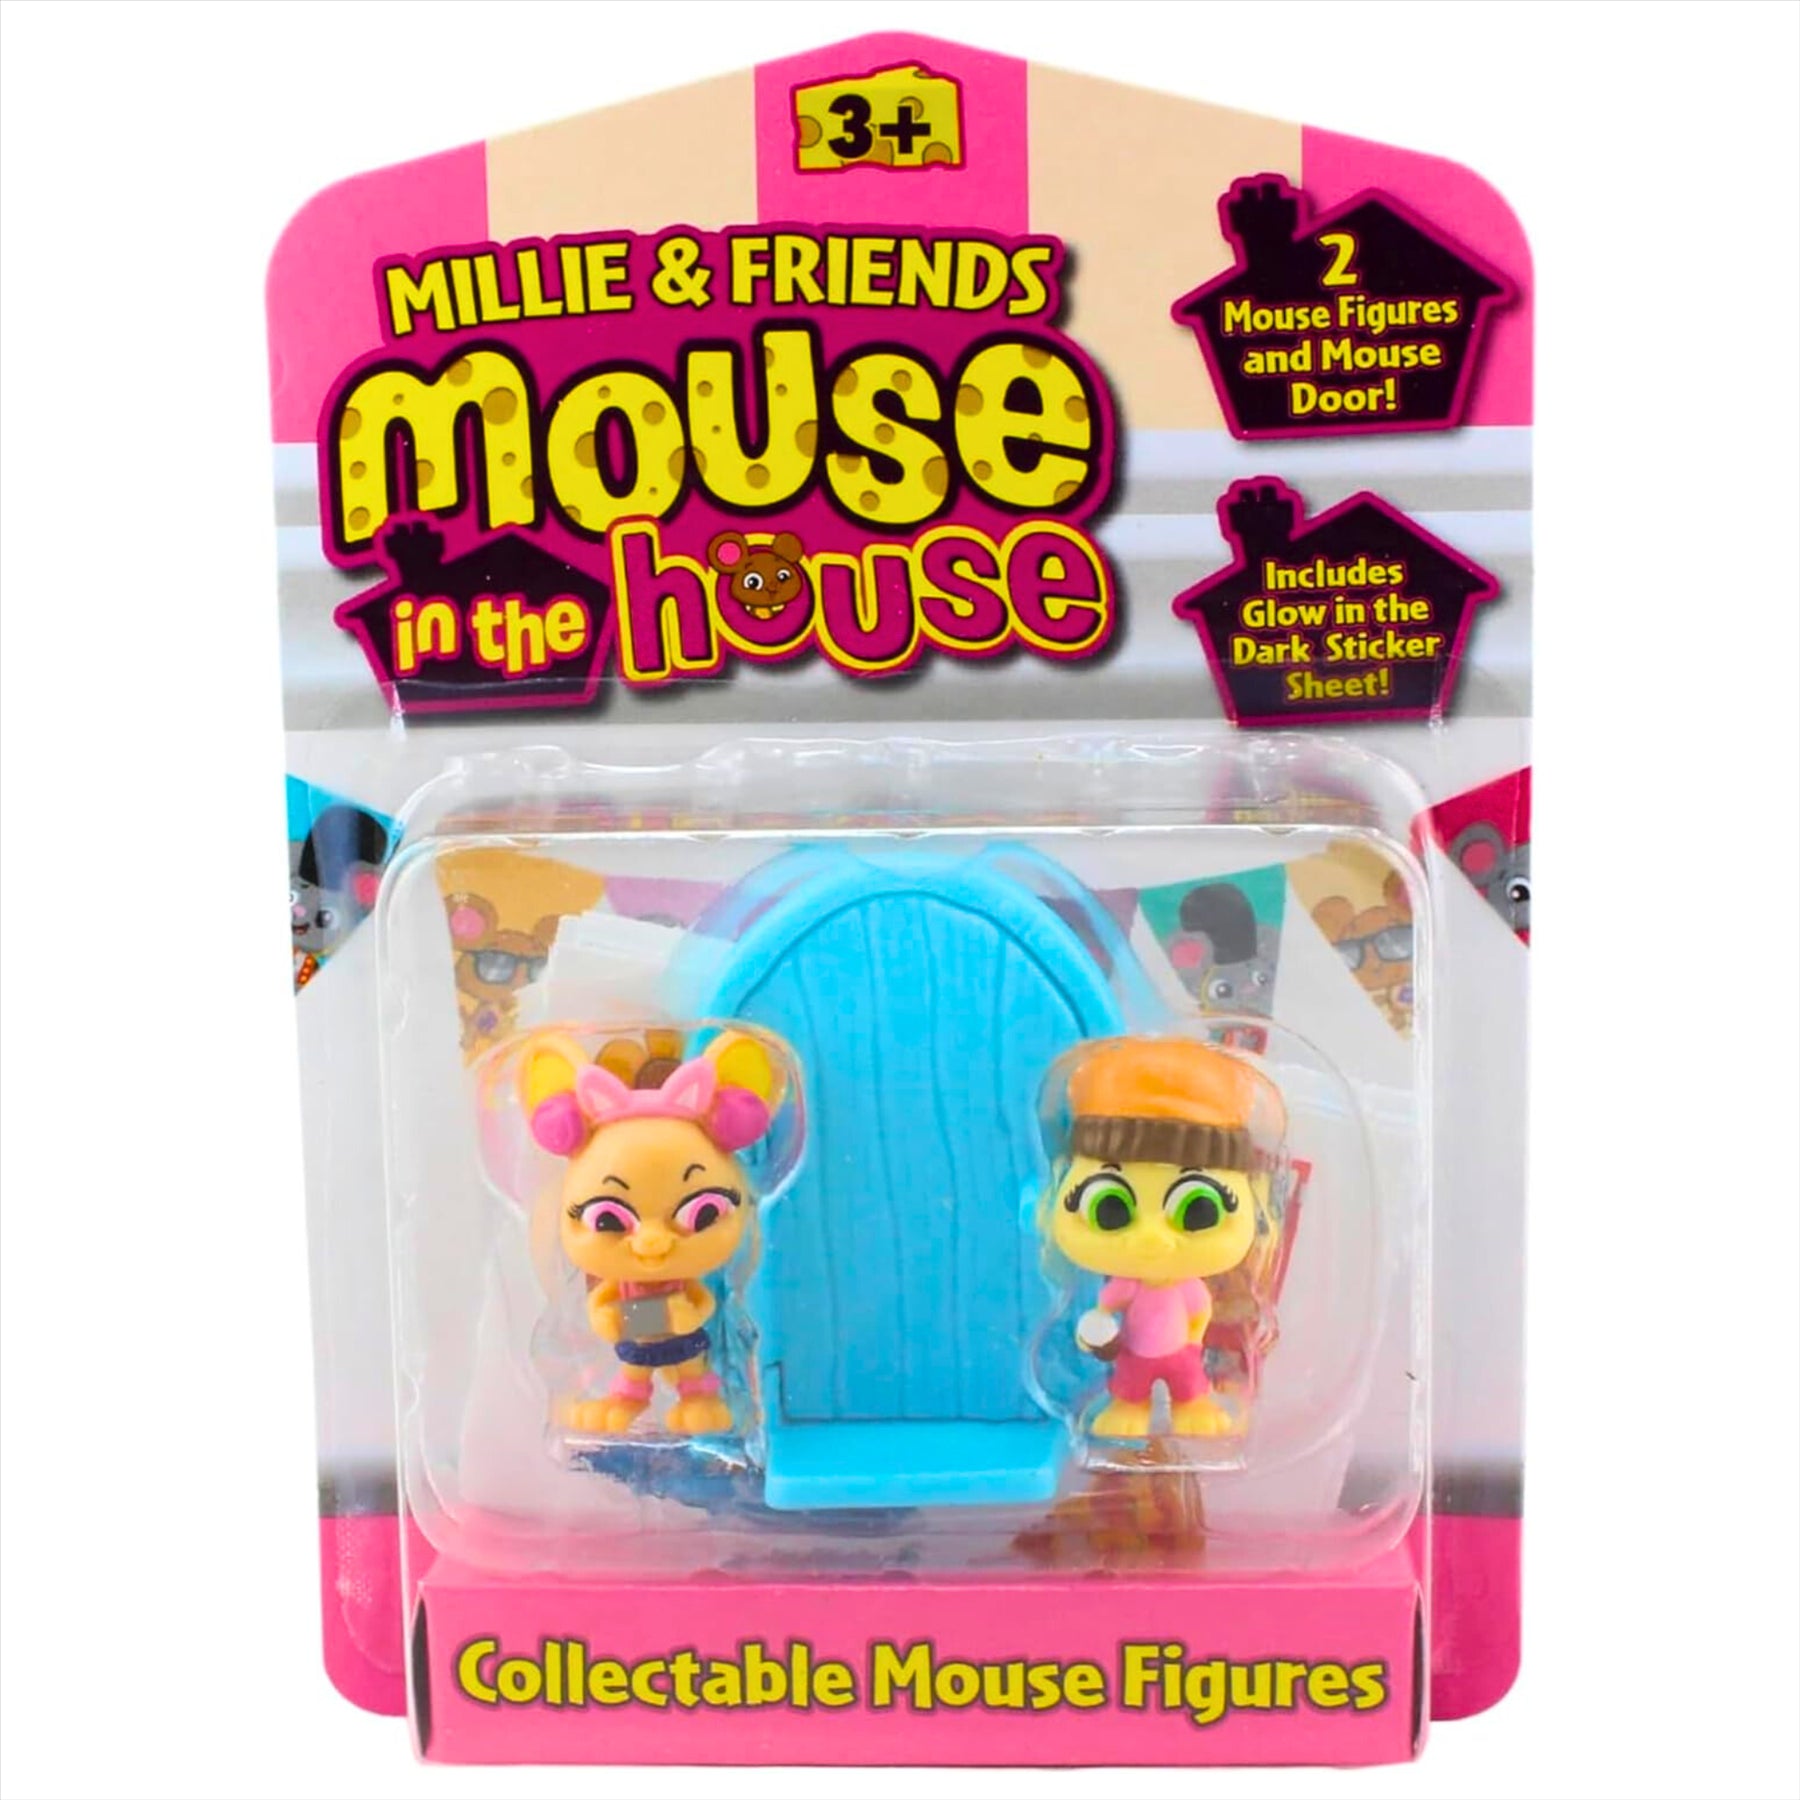 Millie and Friends Mouse in the House Mega Bundle - Red Apple School Playset, Slice 'O' Pie Pizzeria Playset, and 5x Collectable Mouse Figure Packs - Toptoys2u